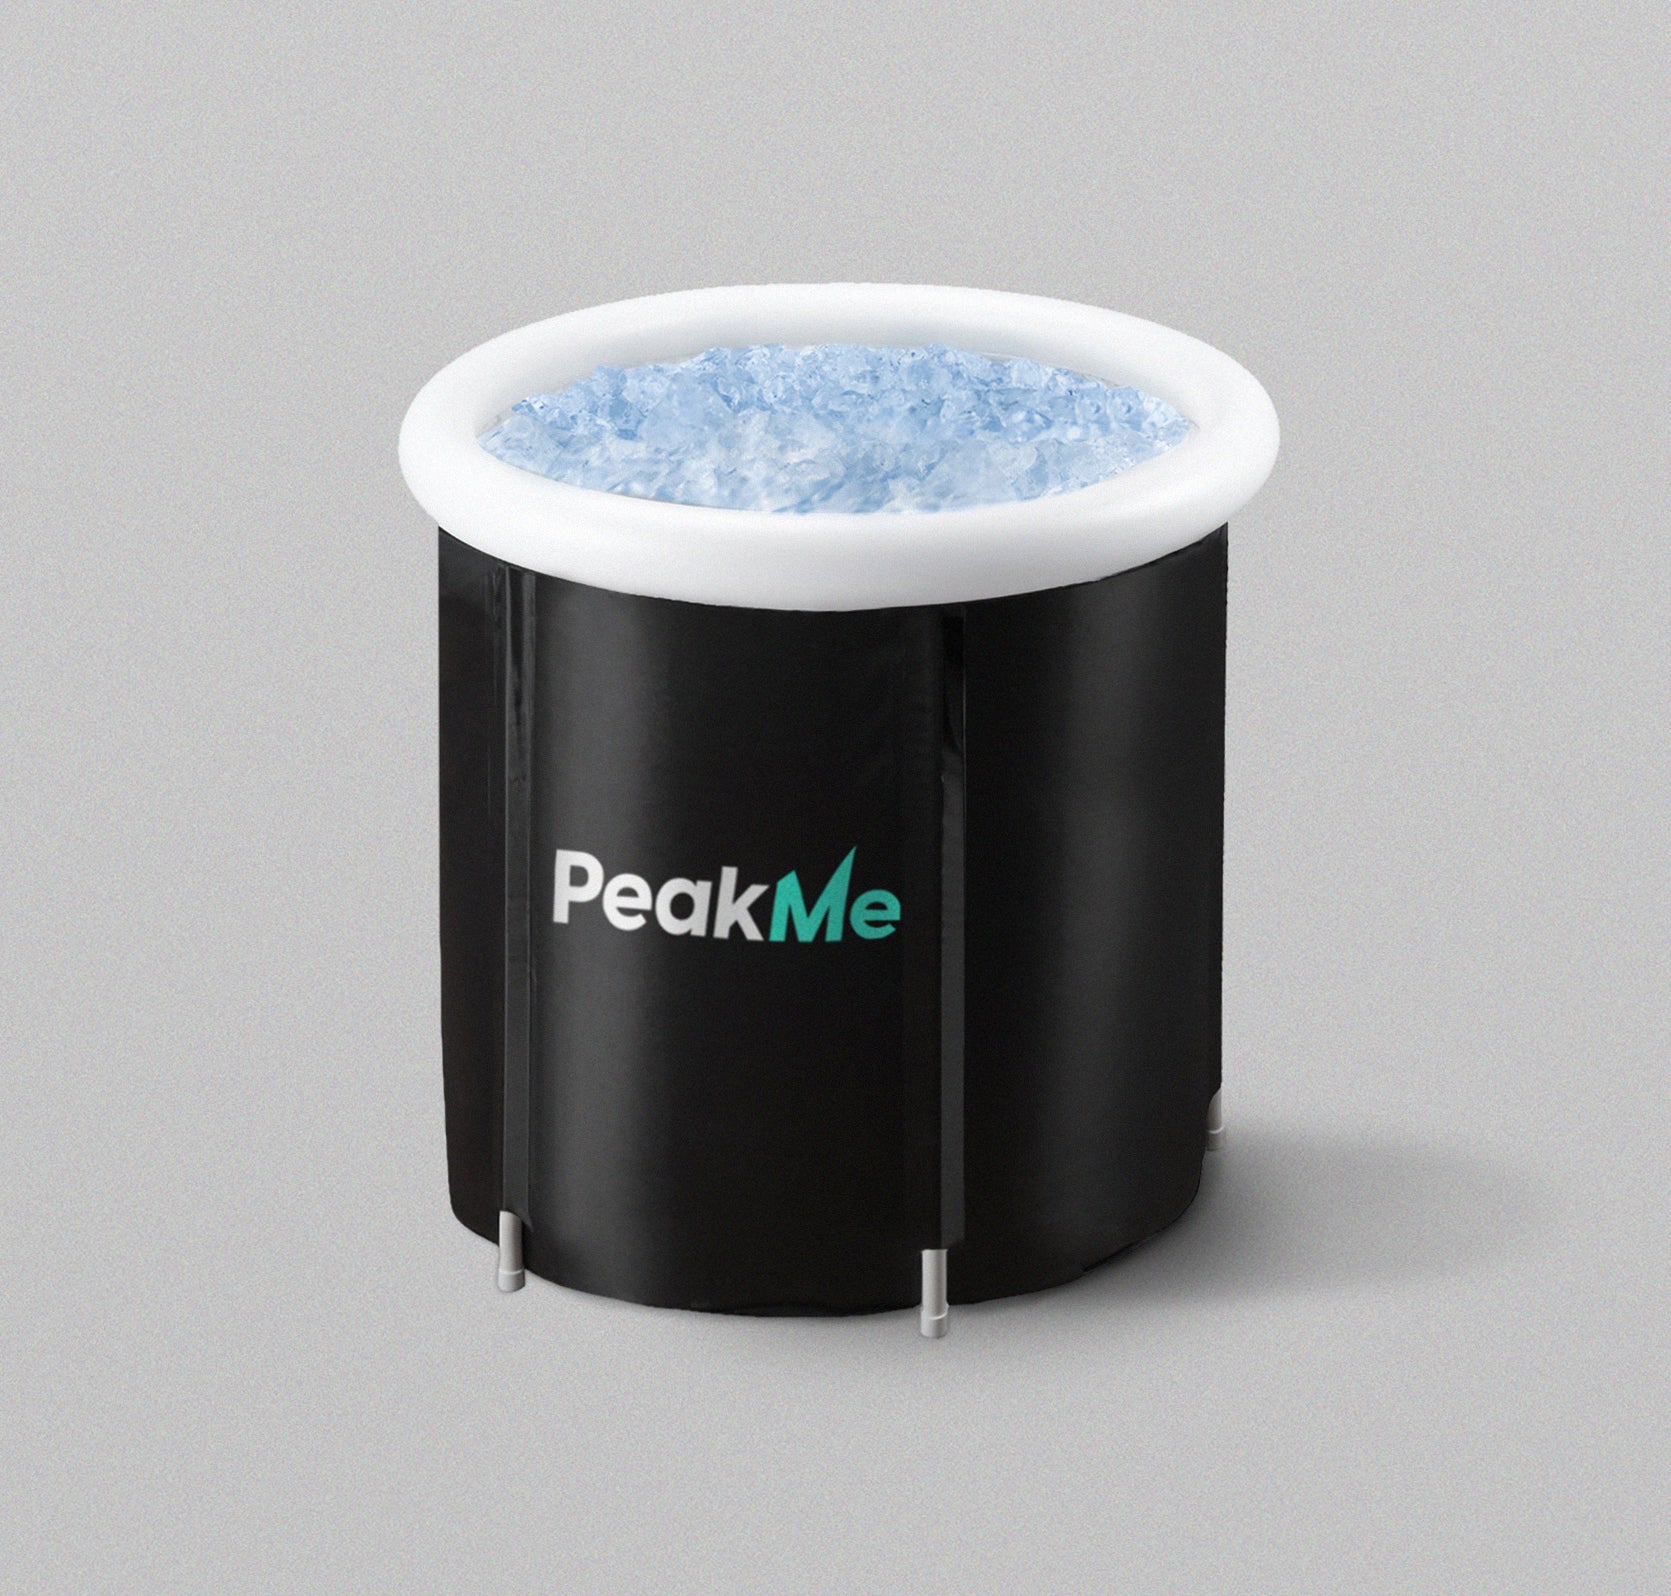 PeakMe Focus – Portable Ice Bath for Recovery and Health